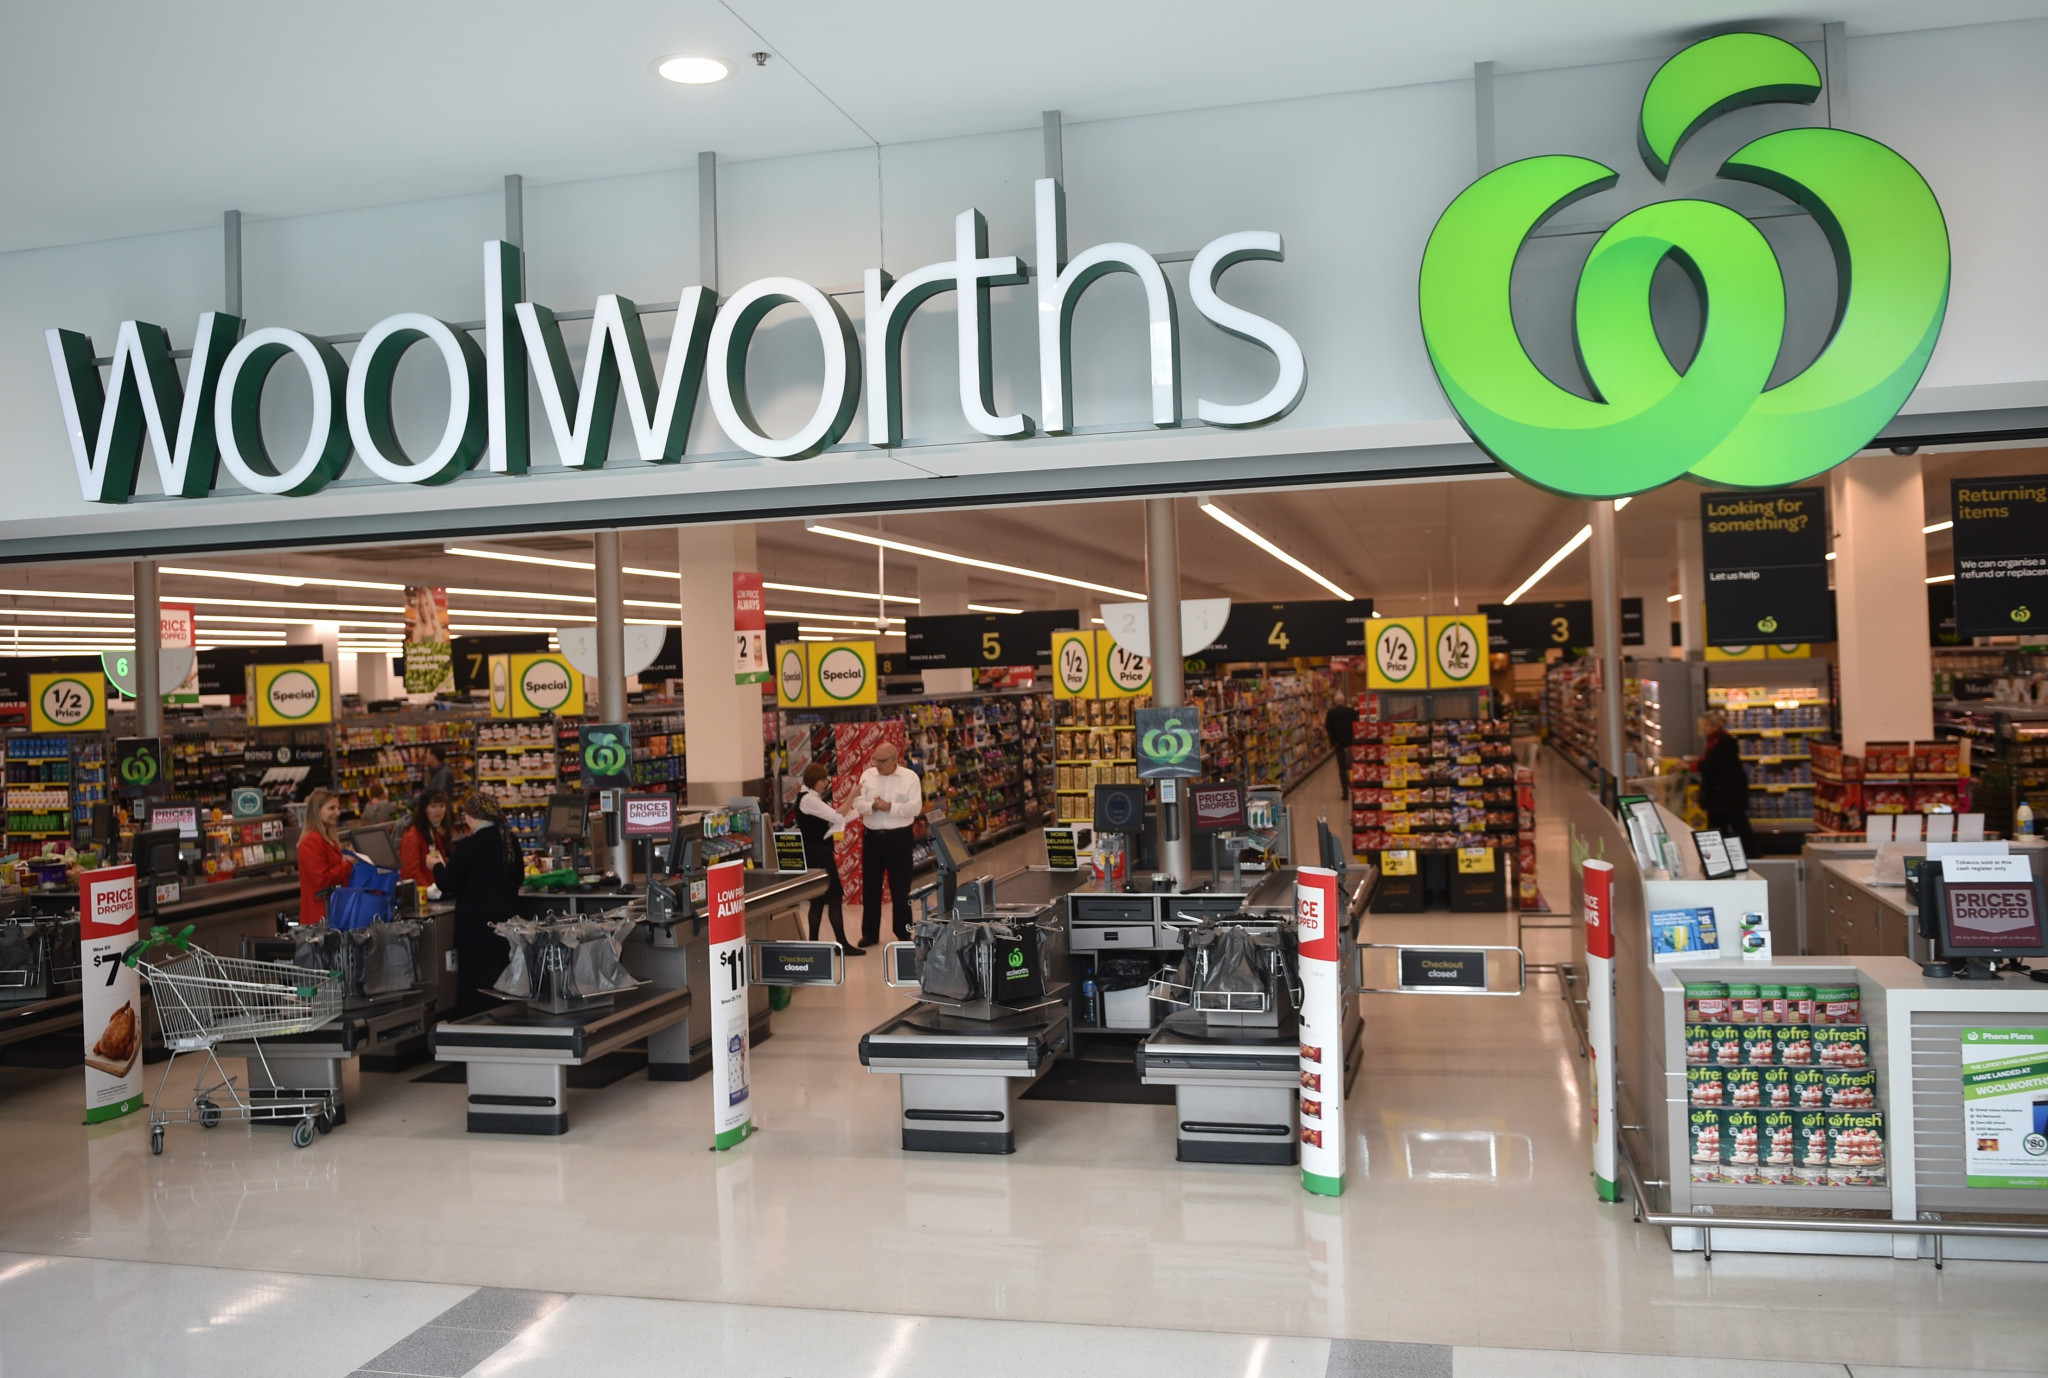 Woolworths has announced that it will be an official supermarket and fresh food supporter for the Australian teams at Tokyo 2020 ©Getty Images